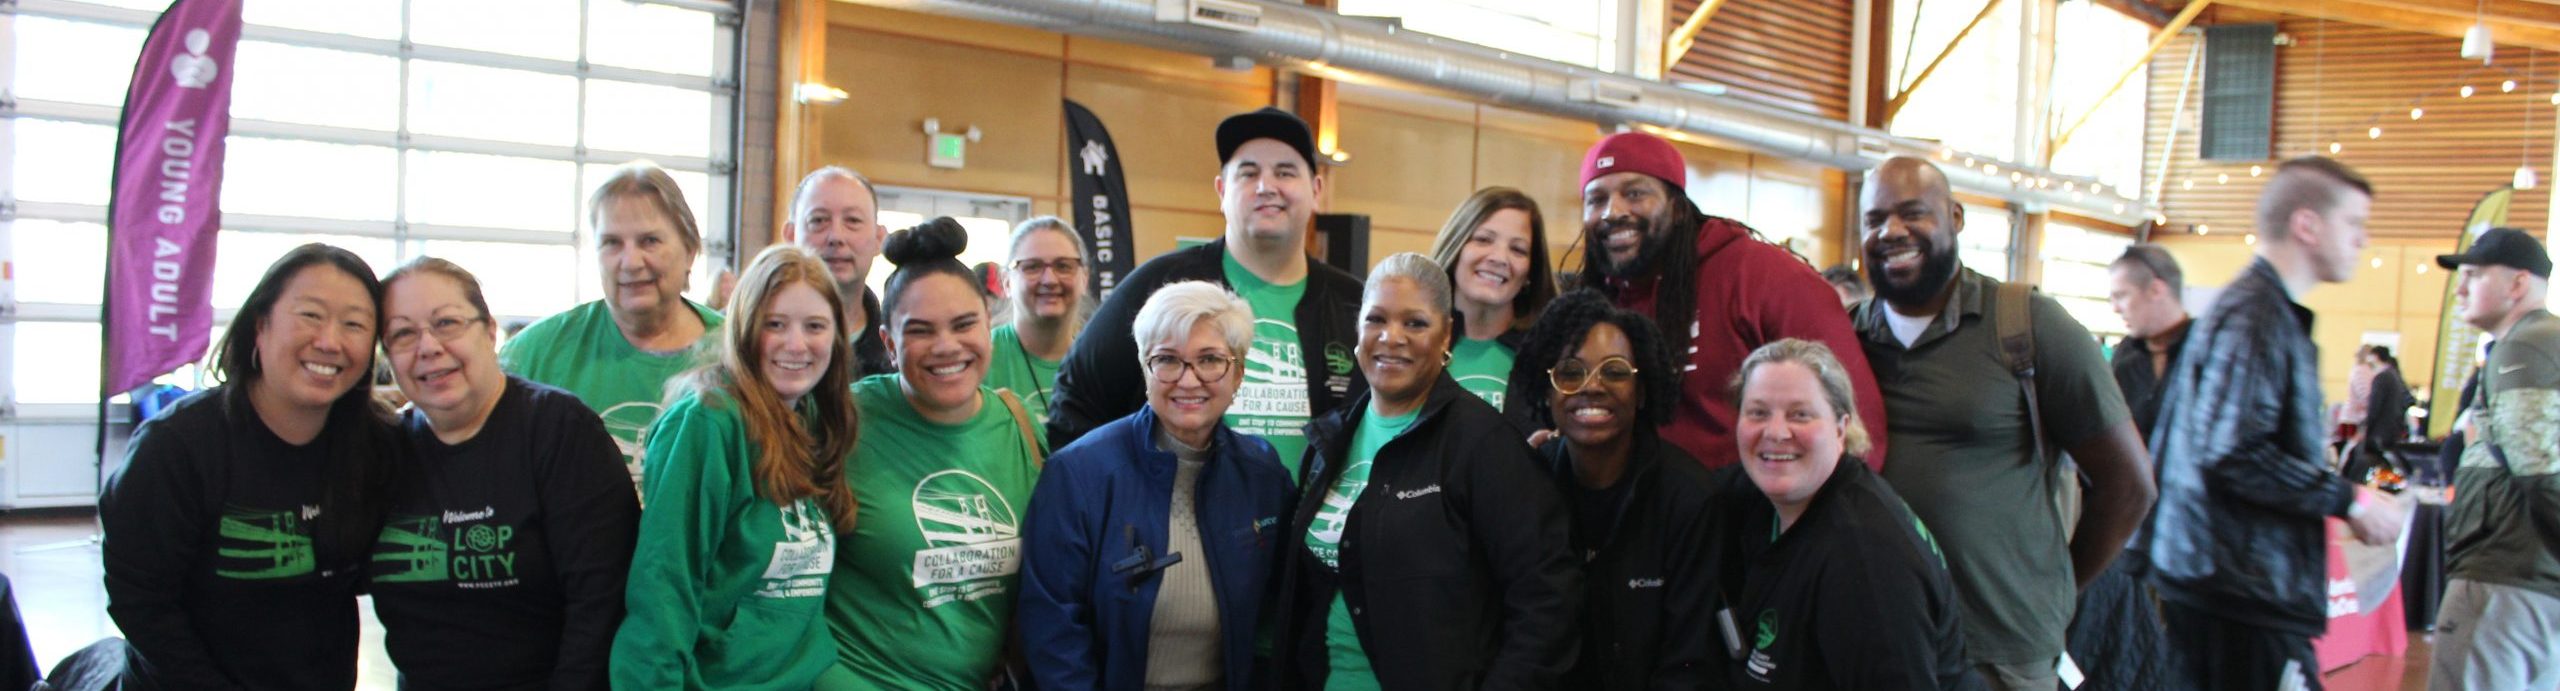 Pierce County Community Engagement Task Force members pose at the March 2023 Collaboration for a Cause resource and job fair event.